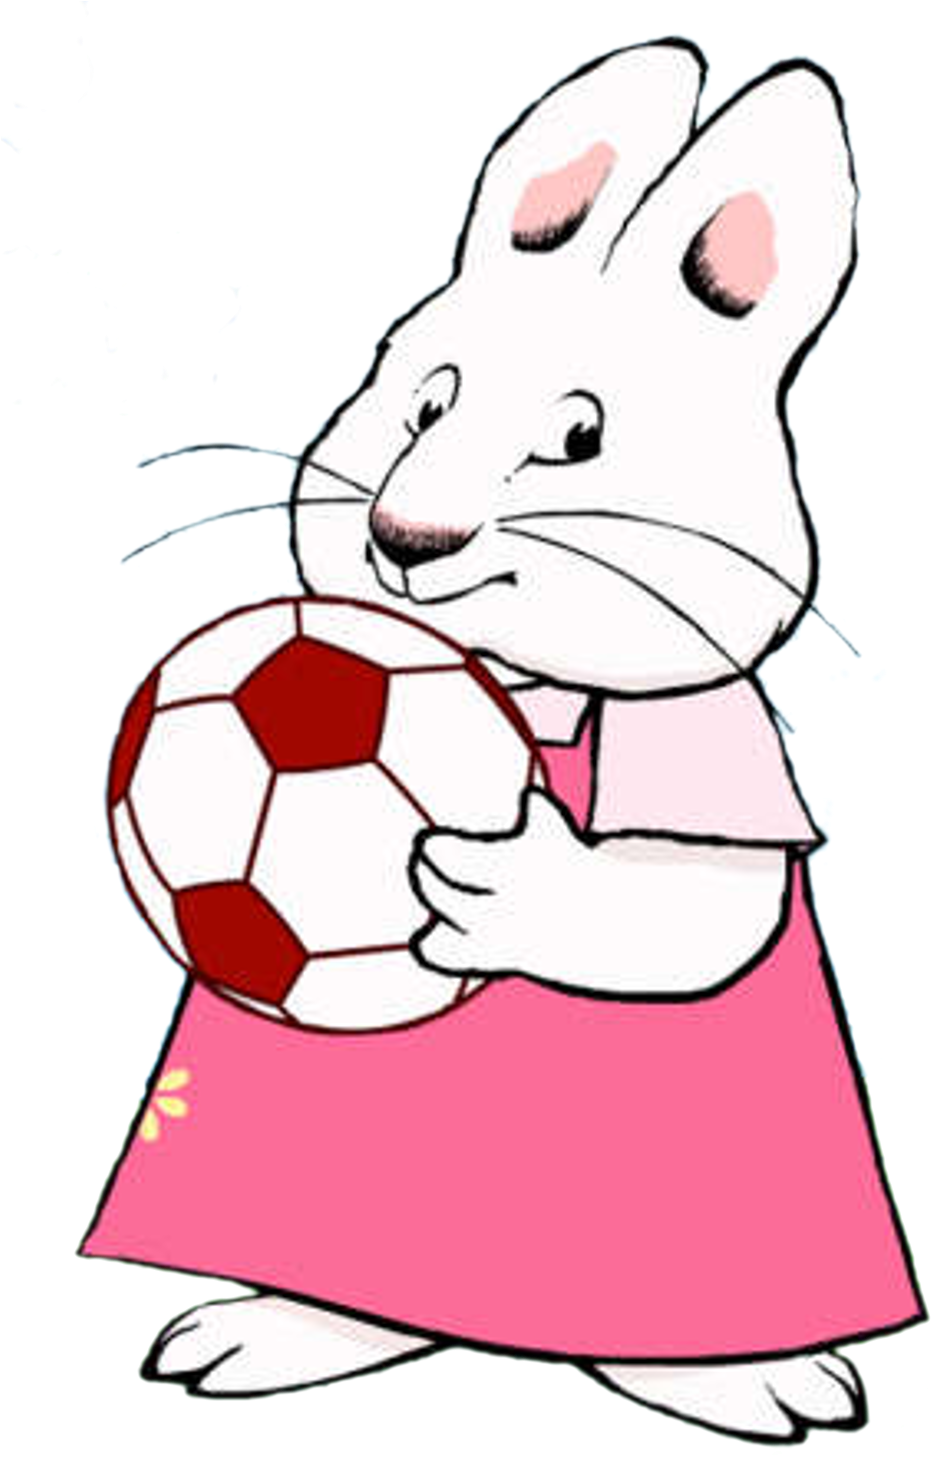 Rubys Soccer Shootout - Max And Ruby Soccer Shootout (976x1480)